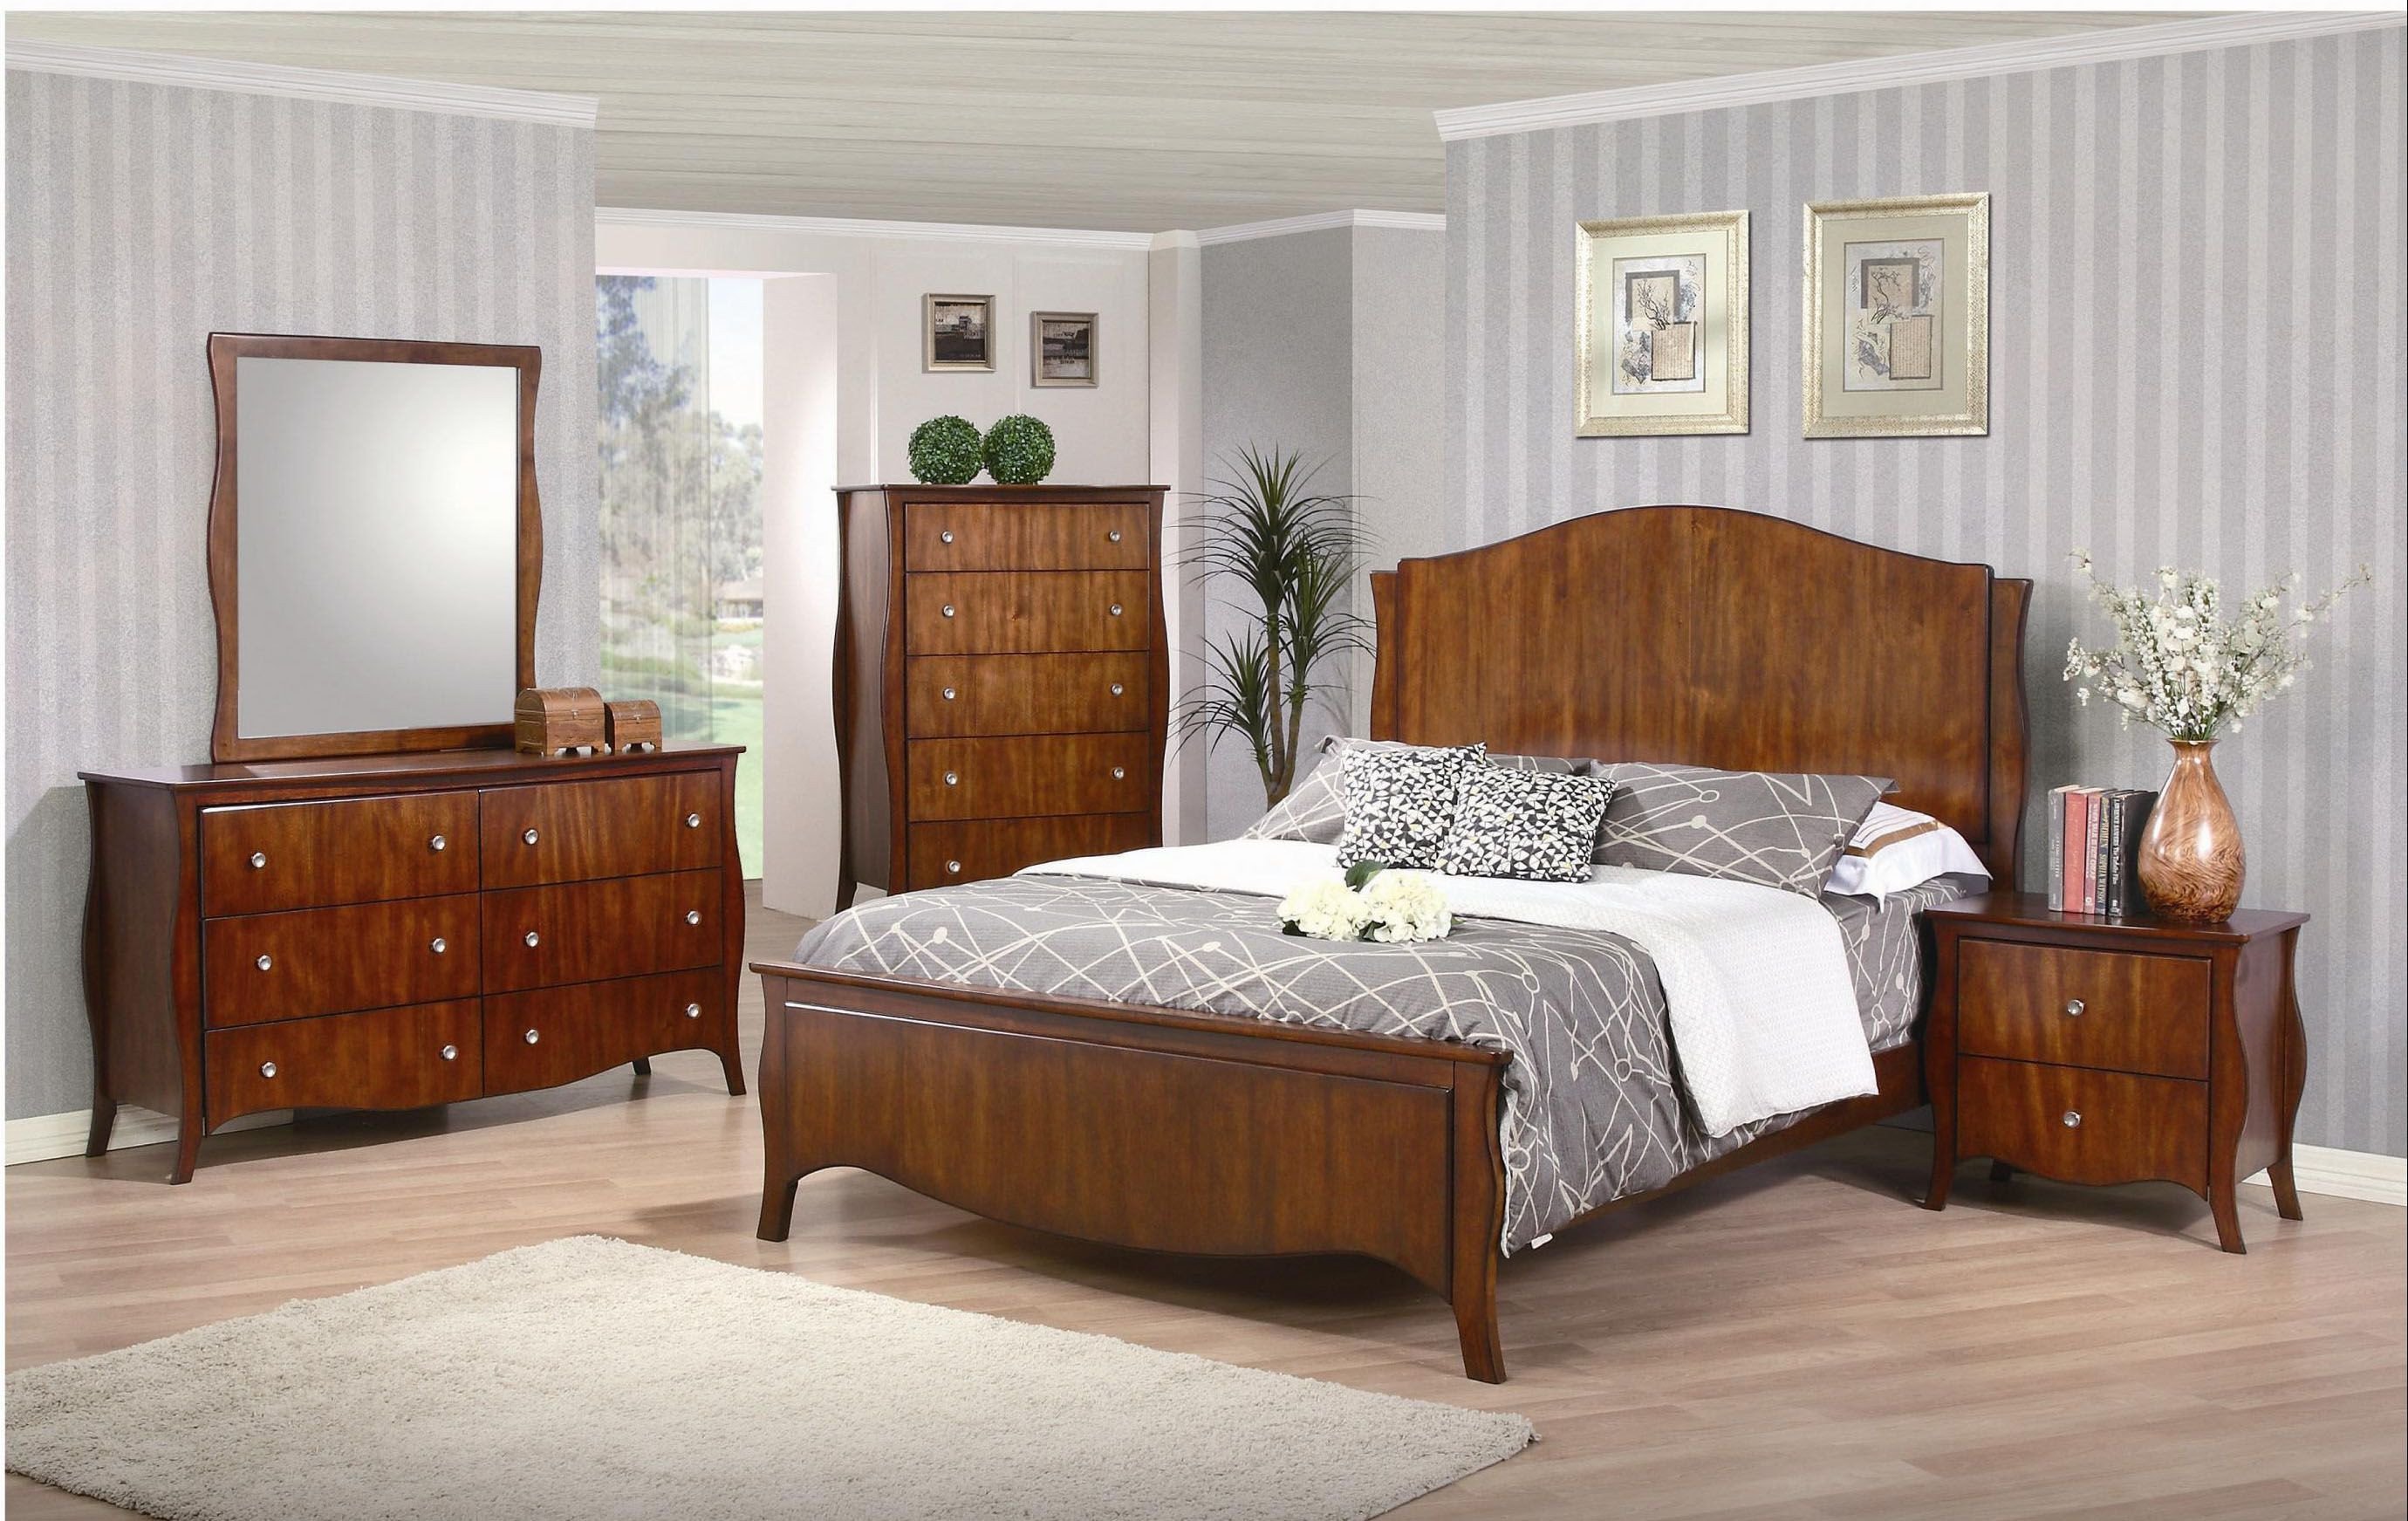 broyhill bedroom furniture prices